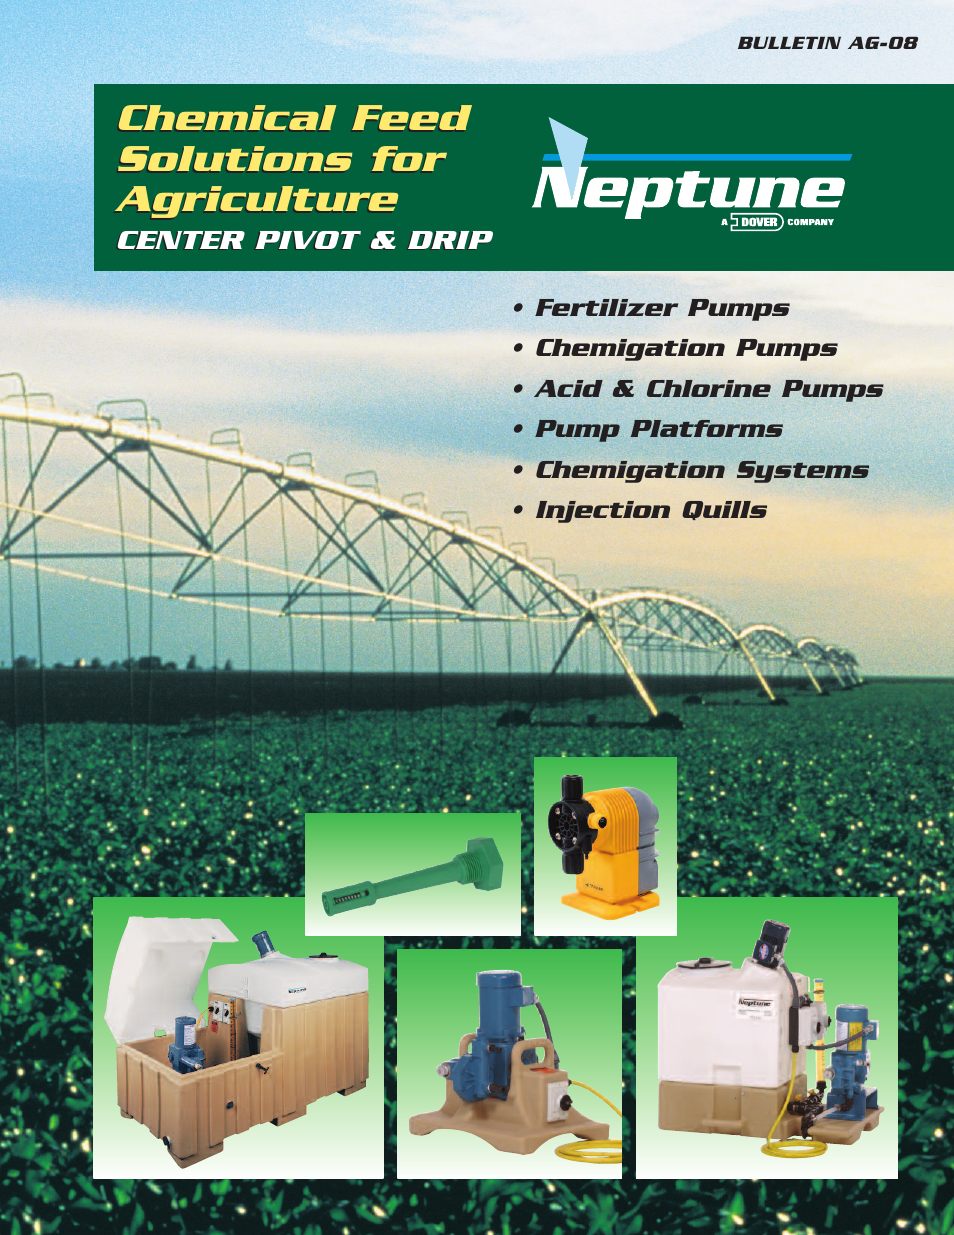 Neptune Chemical Feed Solutions for Agriculture CENTER PIVOT & DRIP